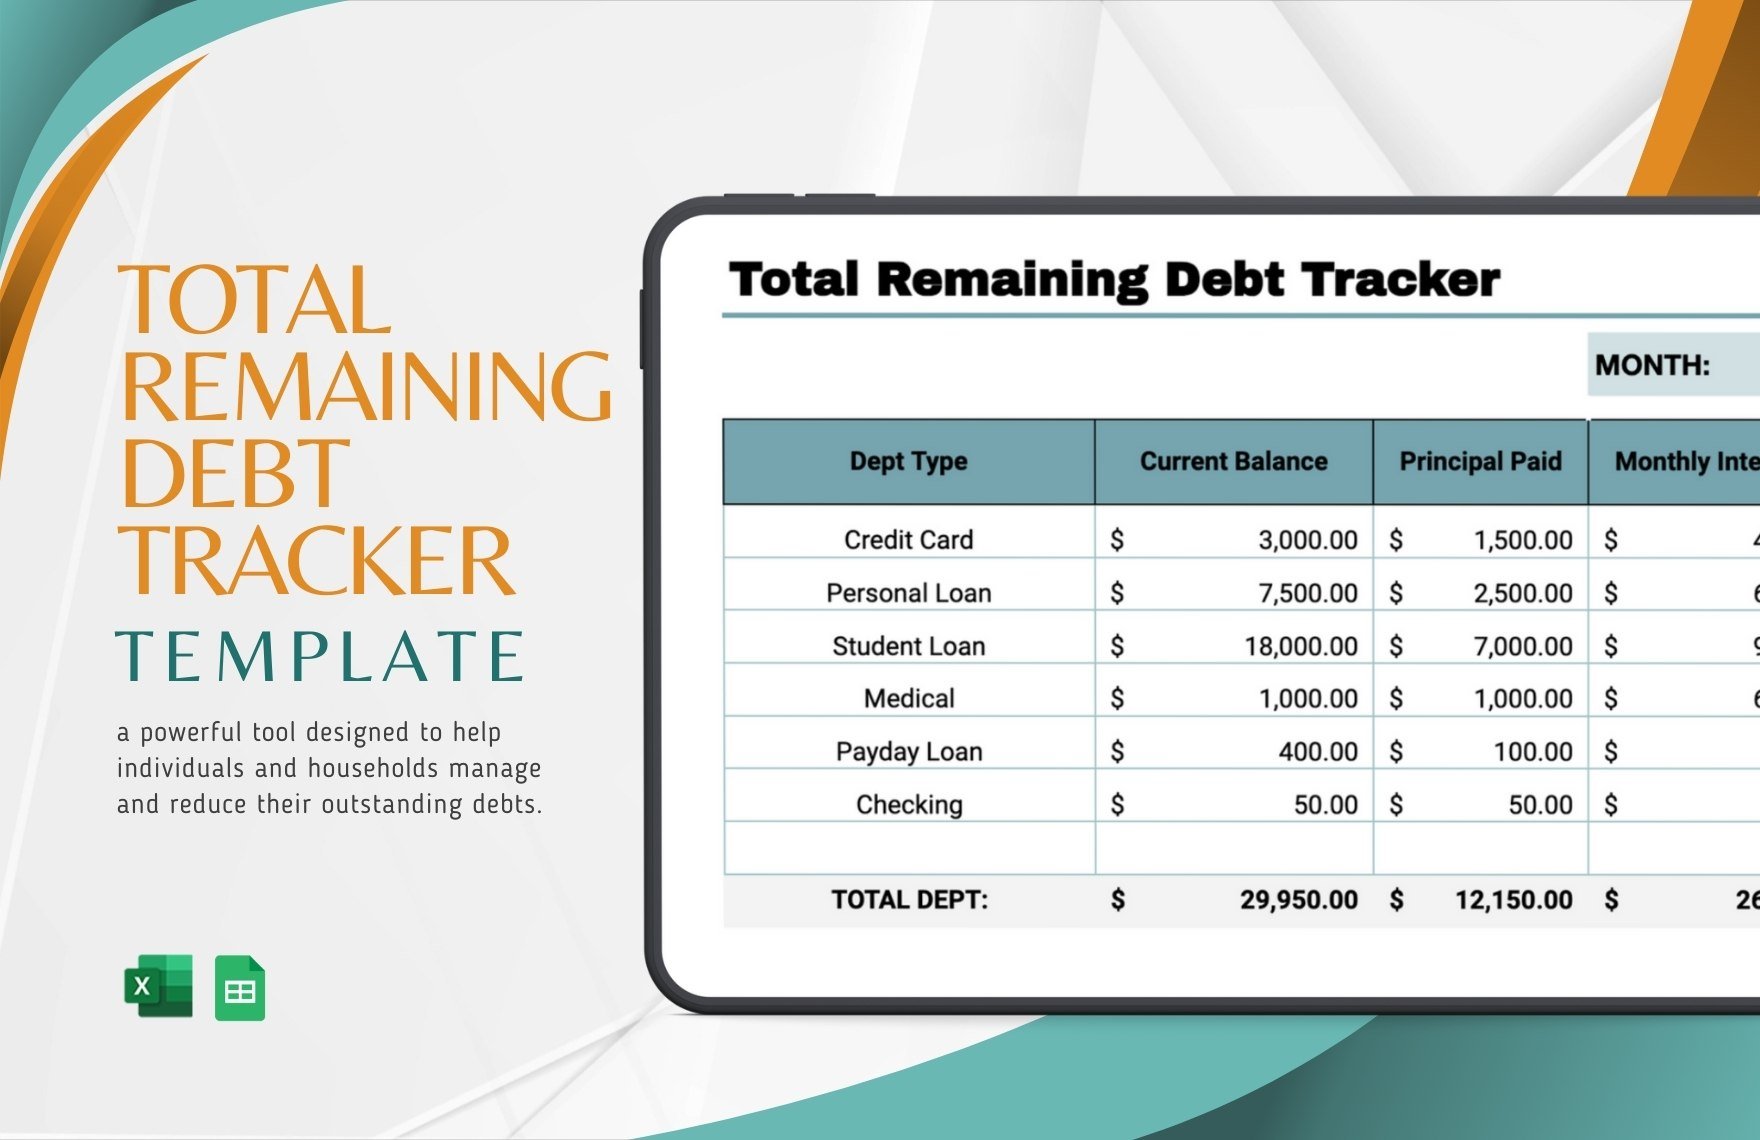 Total Remaining Debt Tracker Template in Excel, Google Sheets